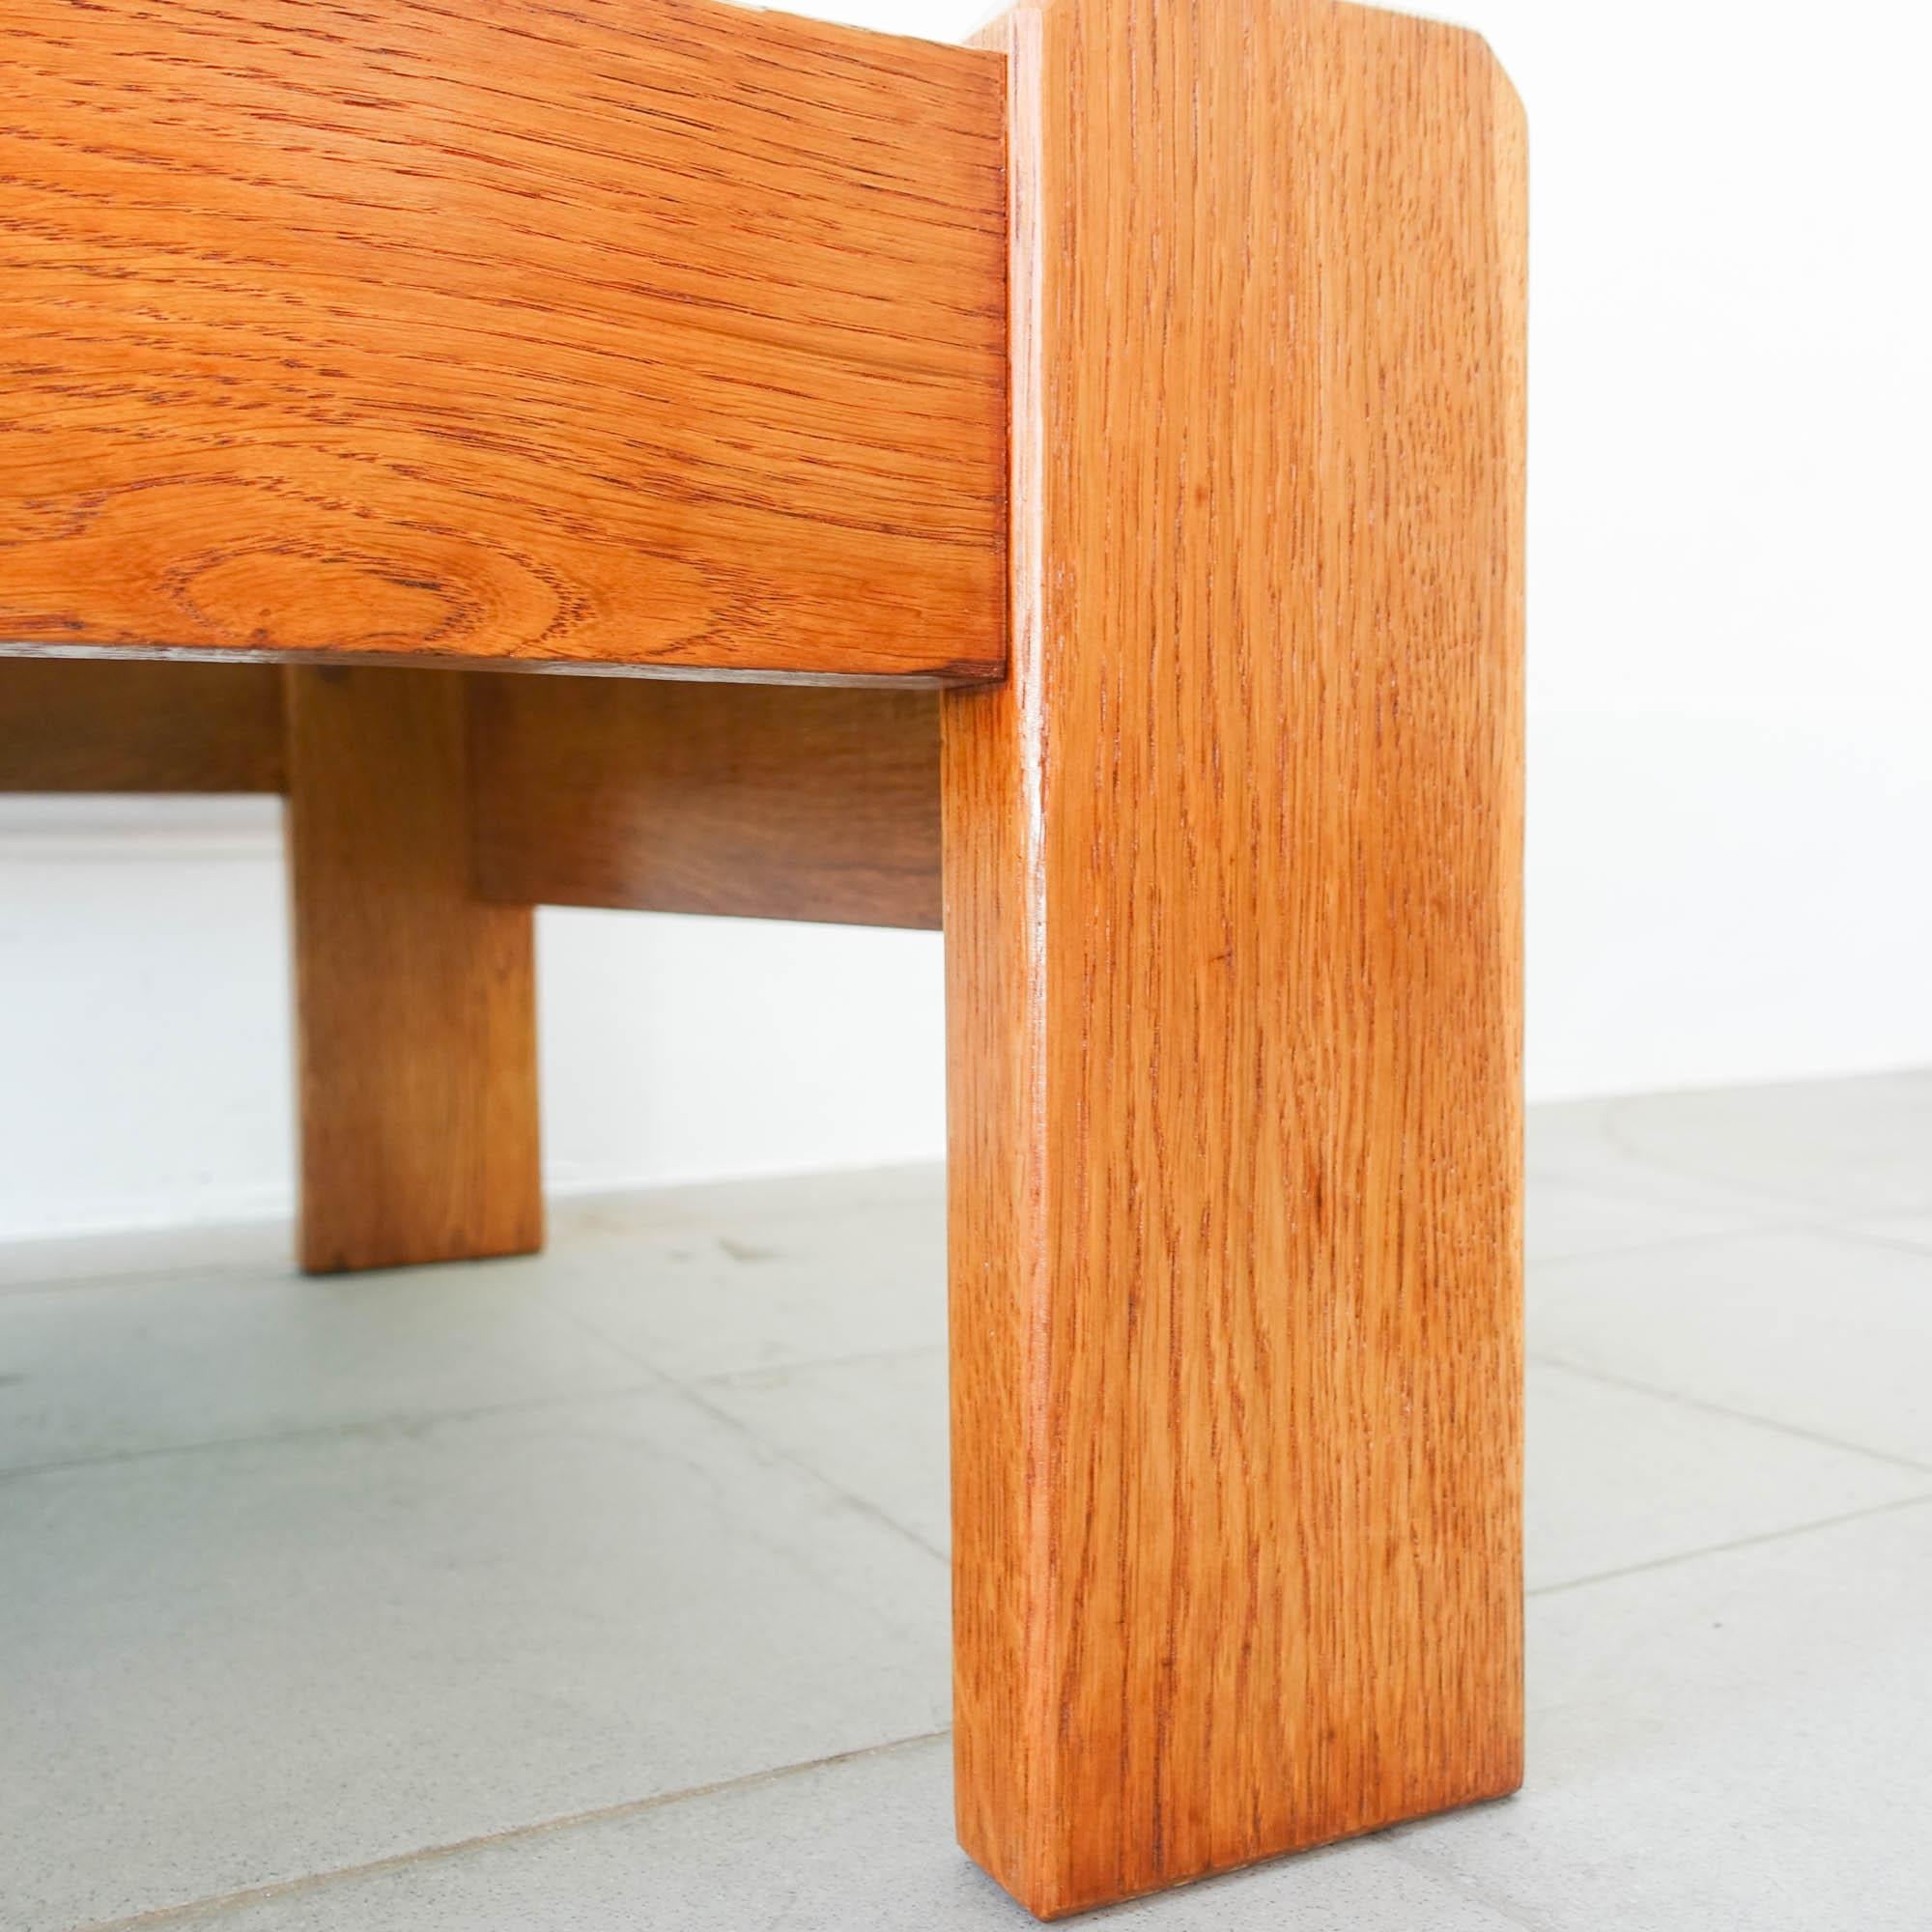 Portuguese Coffee Table in French Oak by Eduardo Afonso Dias, 1970's For Sale 4